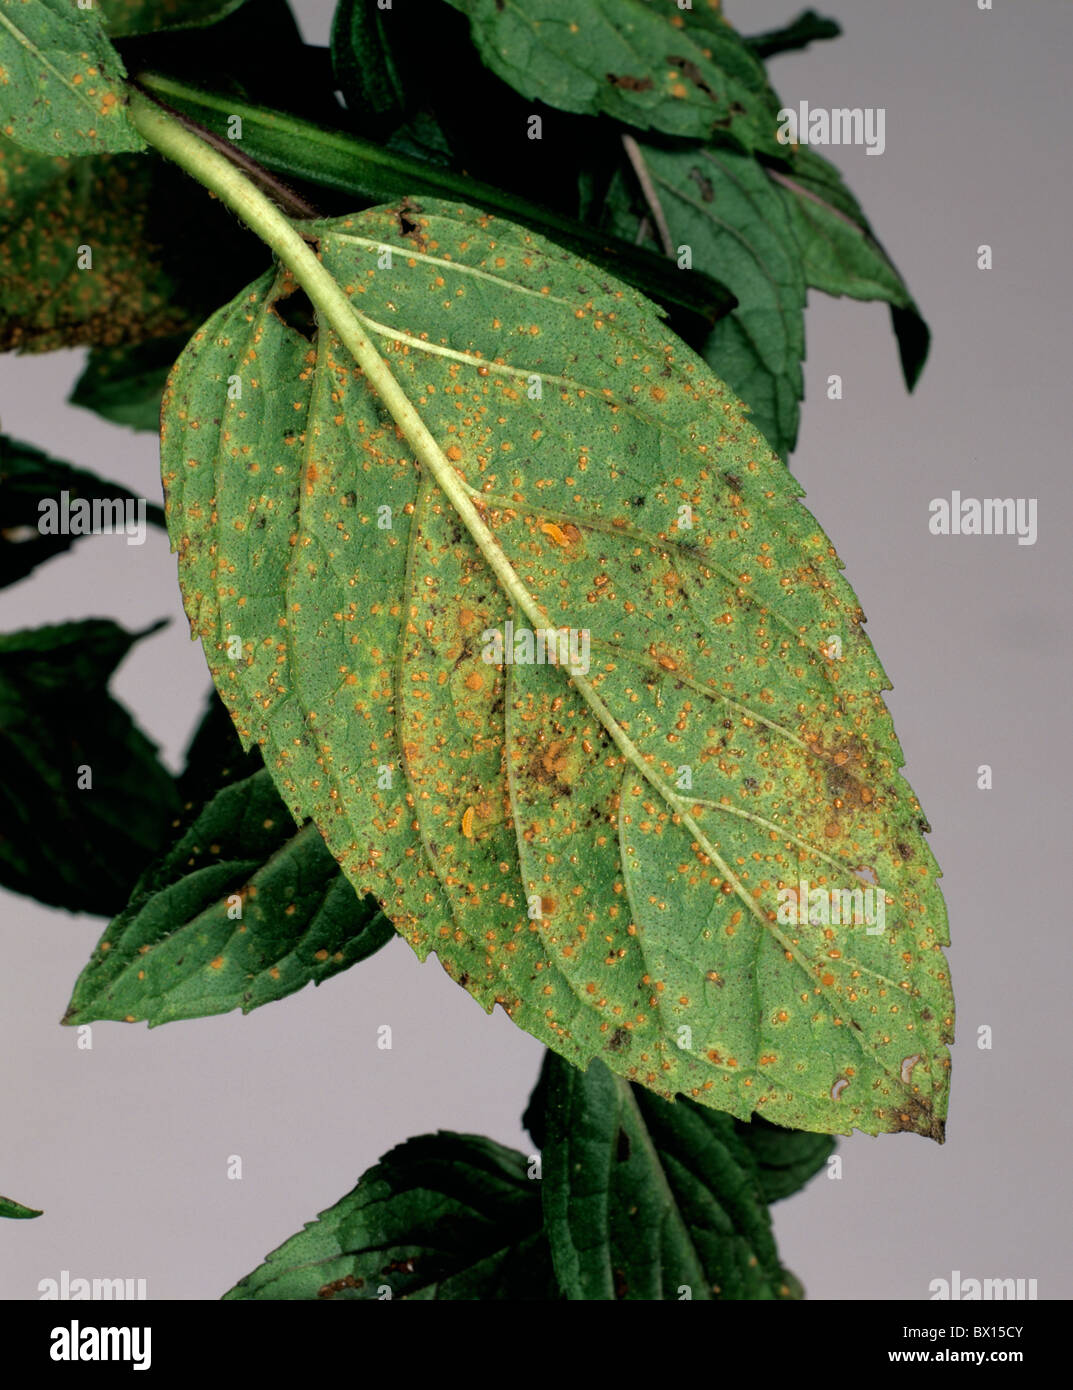 Mint rust (Puccinia menthae) on peppermint plant leaf Stock Photo